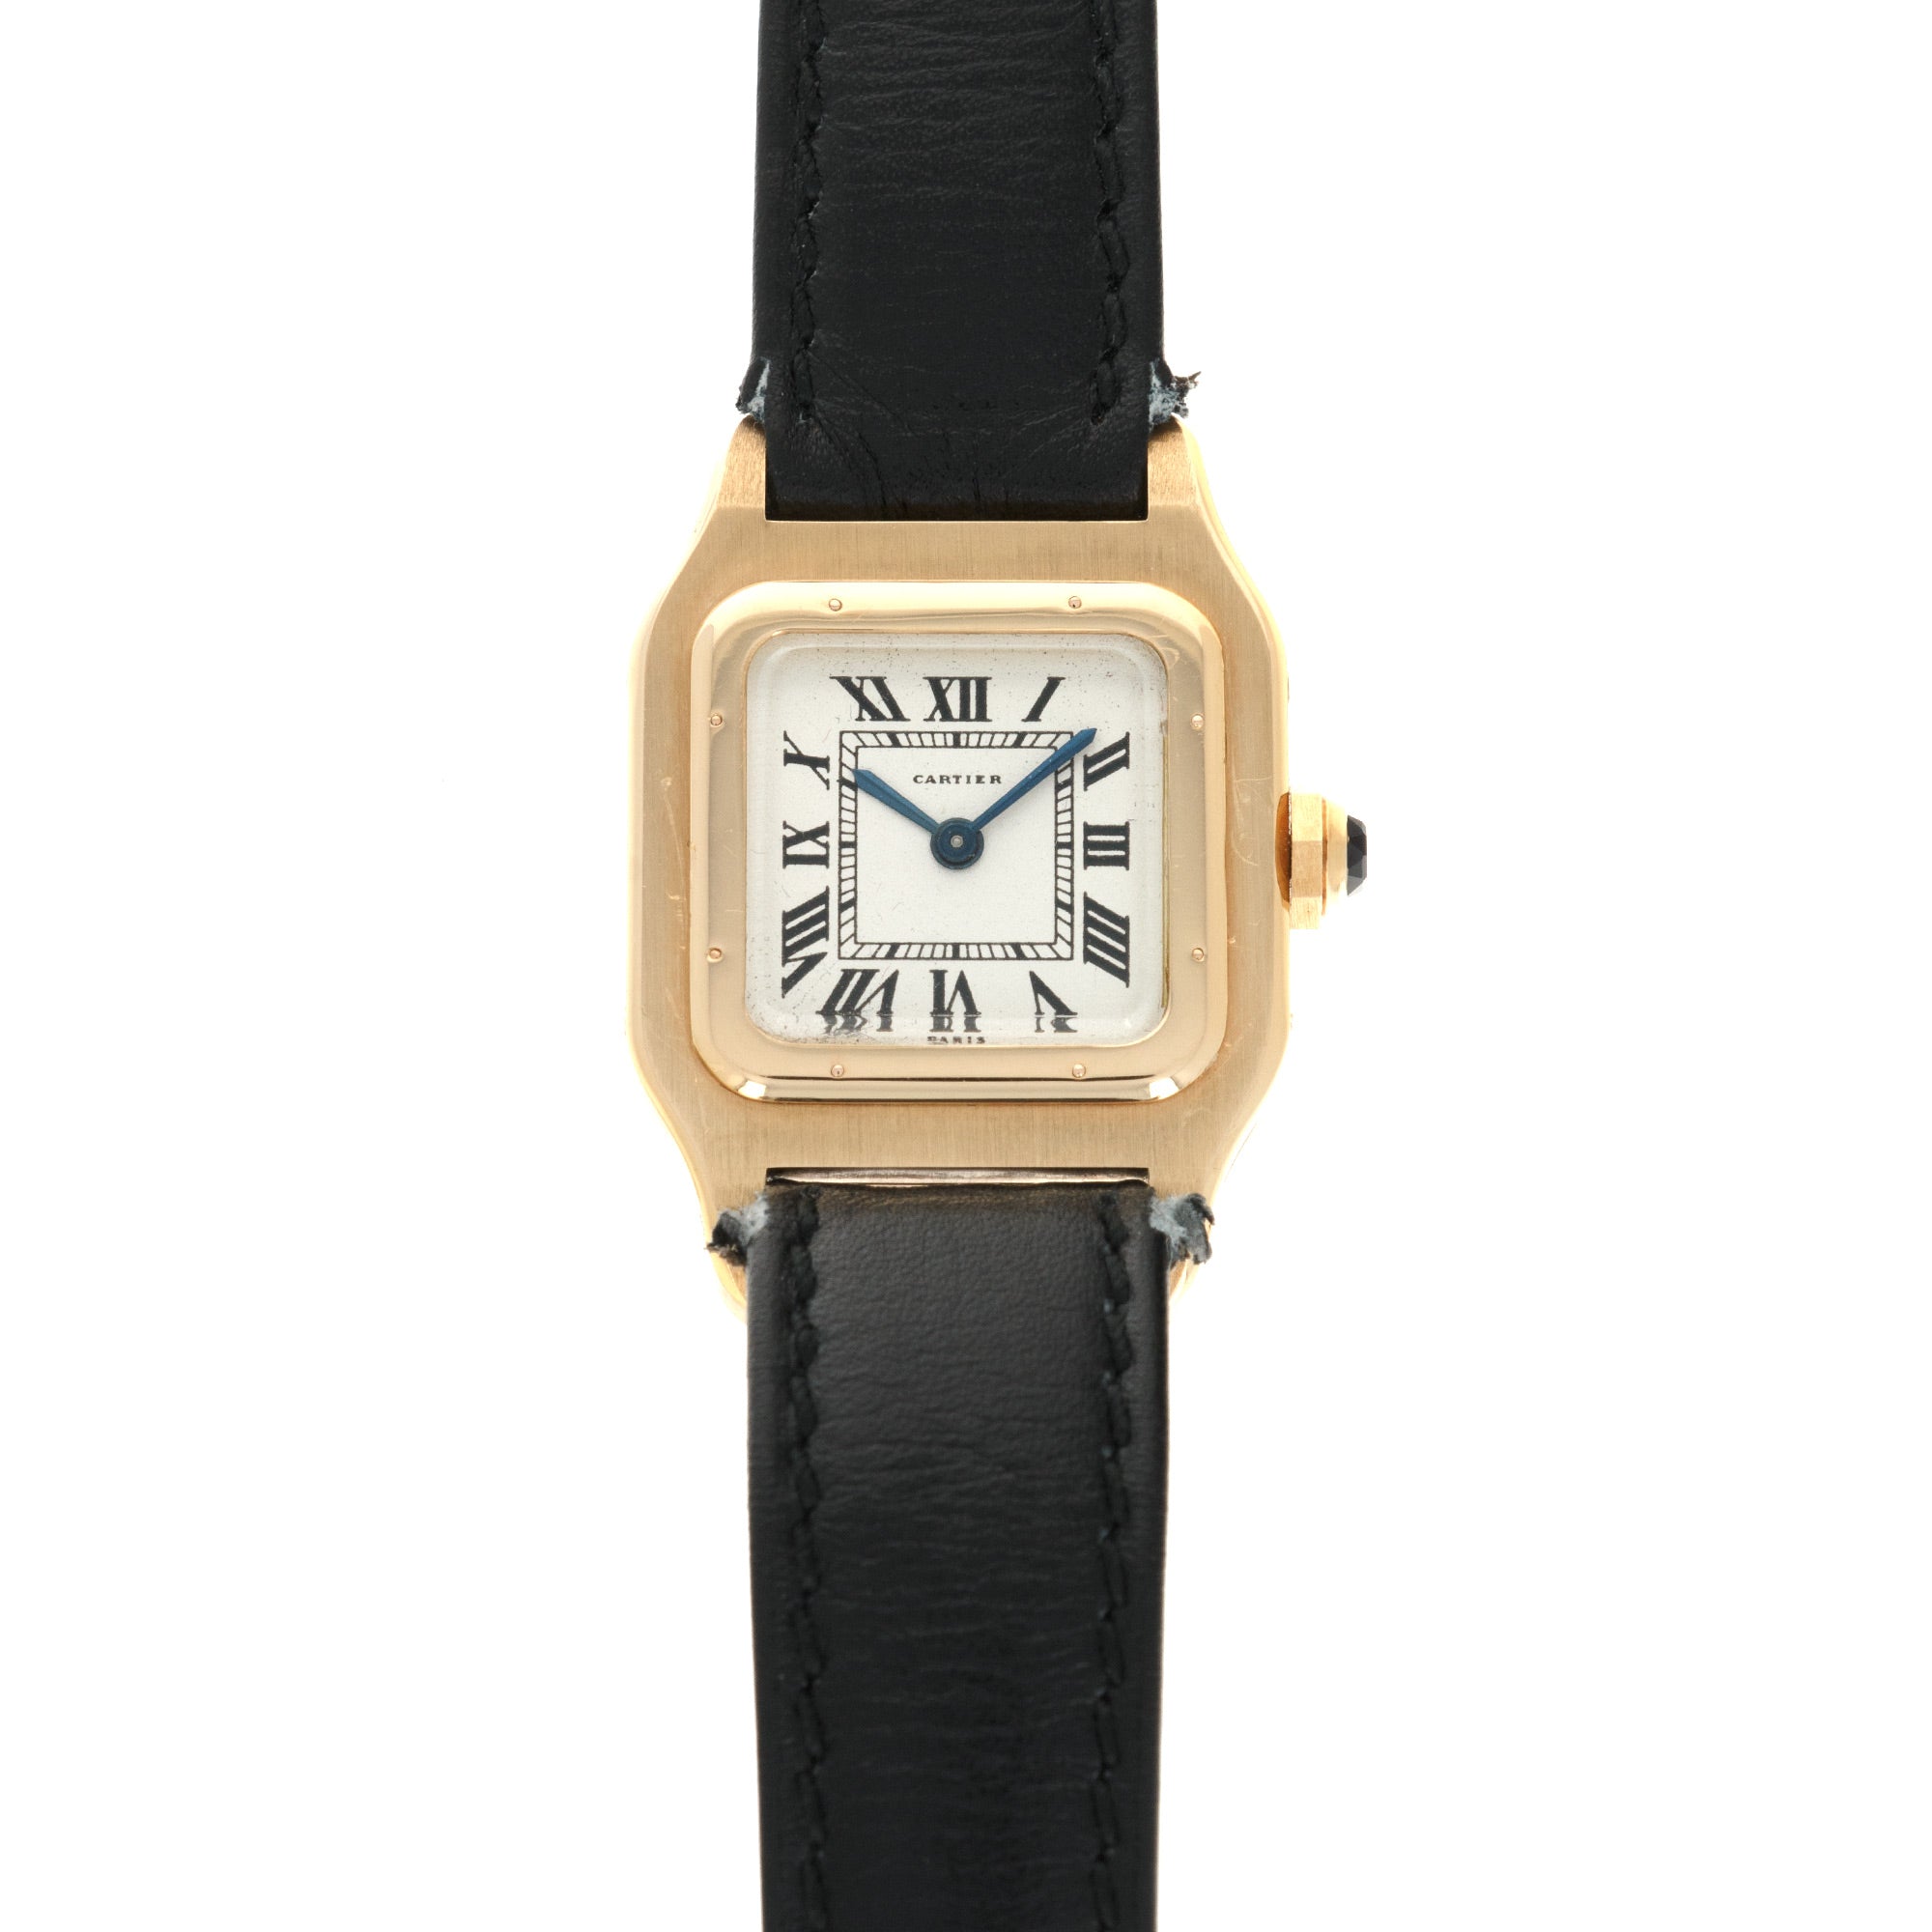 Cartier - Cartier Yellow Gold Santos Watch in New Old Stock Condition - The Keystone Watches